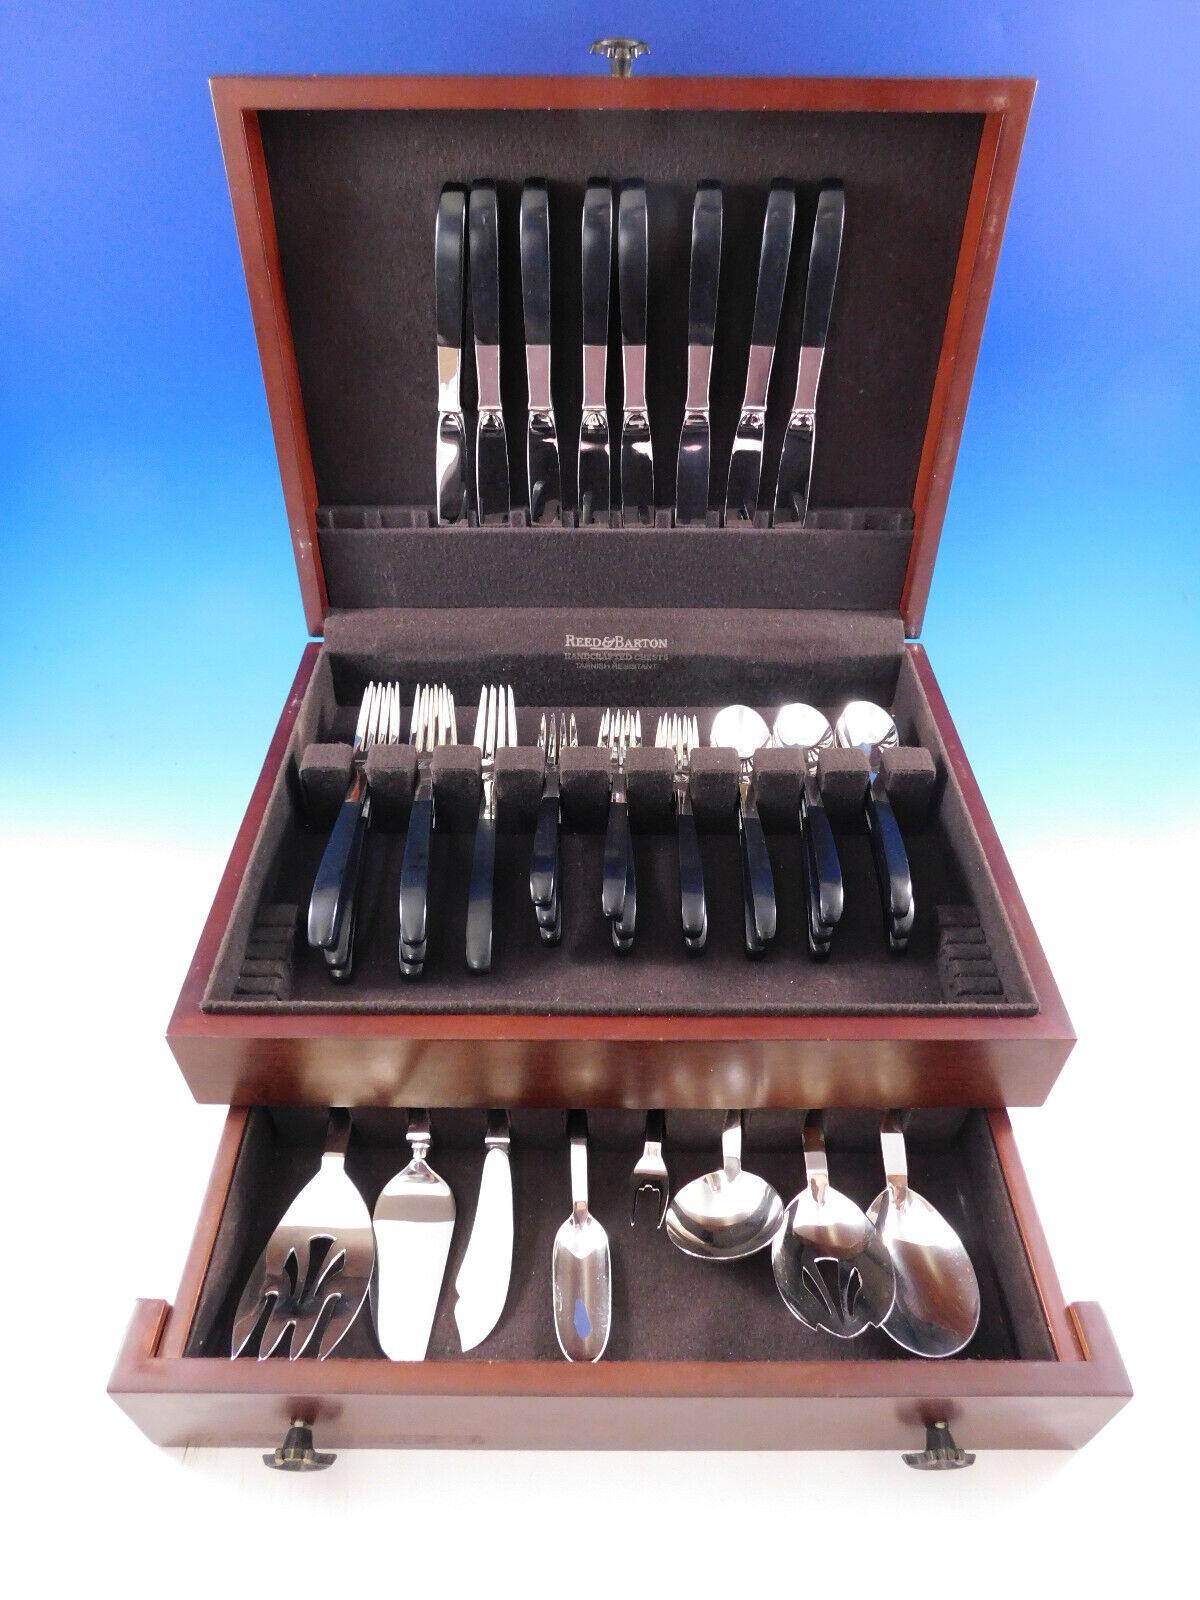 Mid-Century Modern CONTRAST BY LUNT sterling silver with nylon handle Flatware set, designed by Nord Bowlen of Greenfeld, MA in 1956 - 40 pieces. This set includes:


8 Knives, 9 3/8